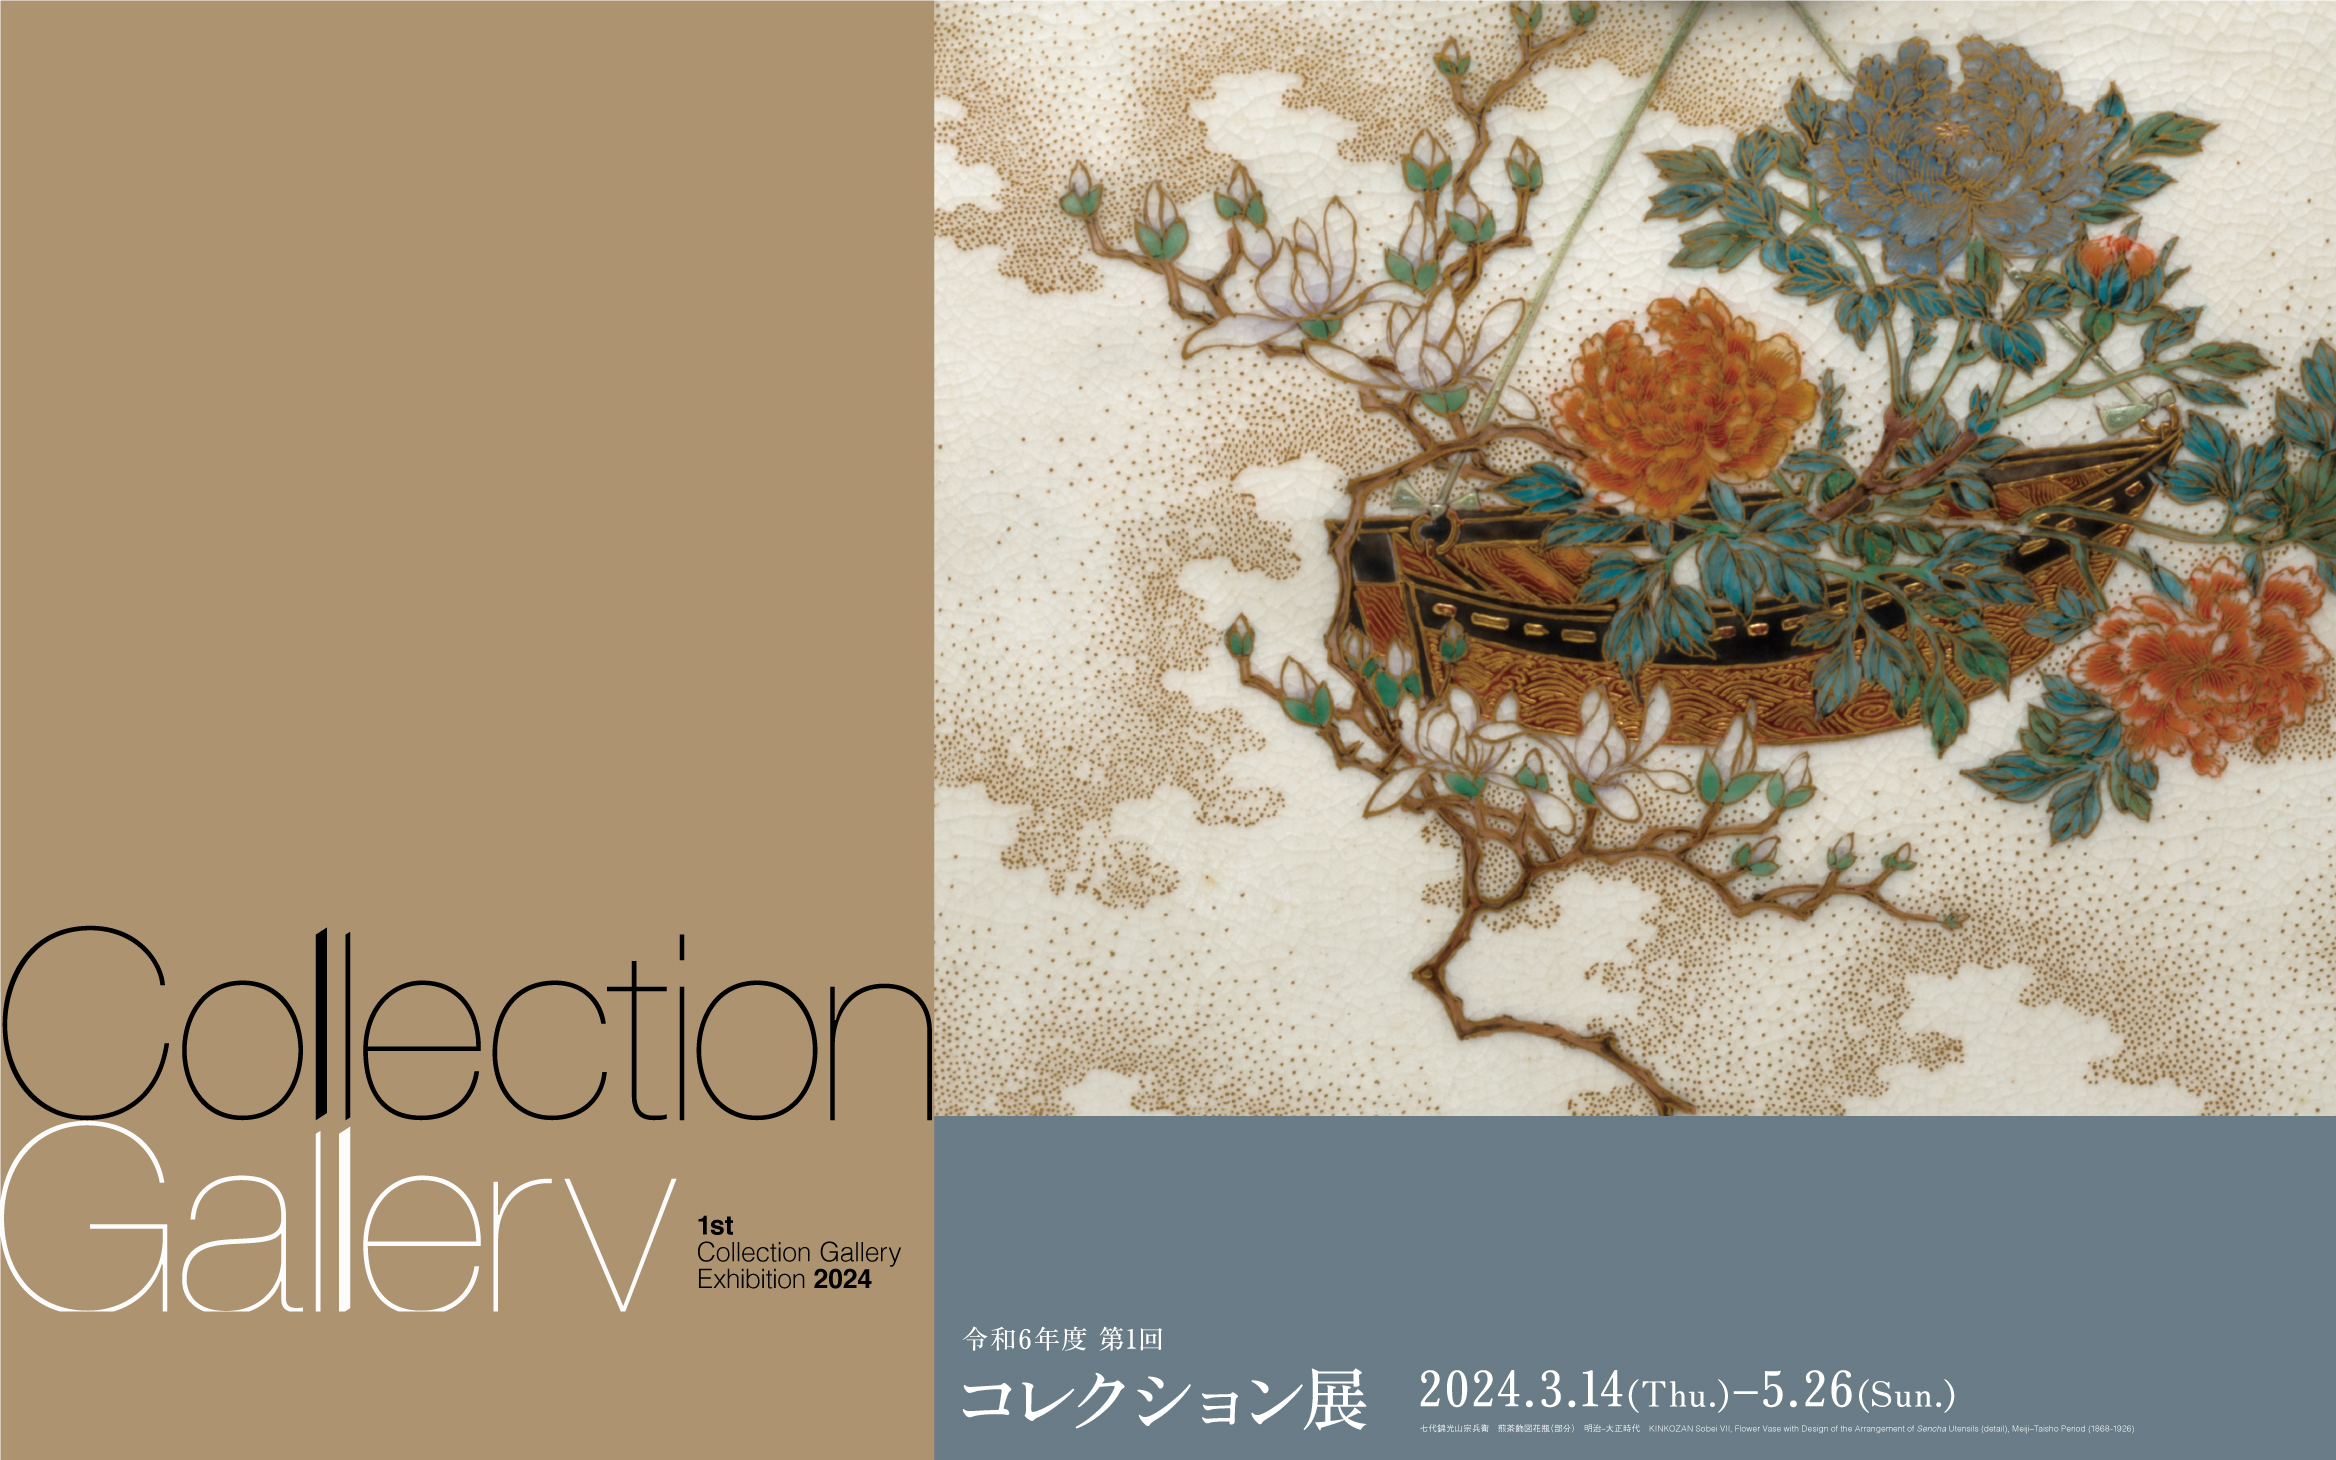 1st Collection Gallery Exhibition 2024–2025